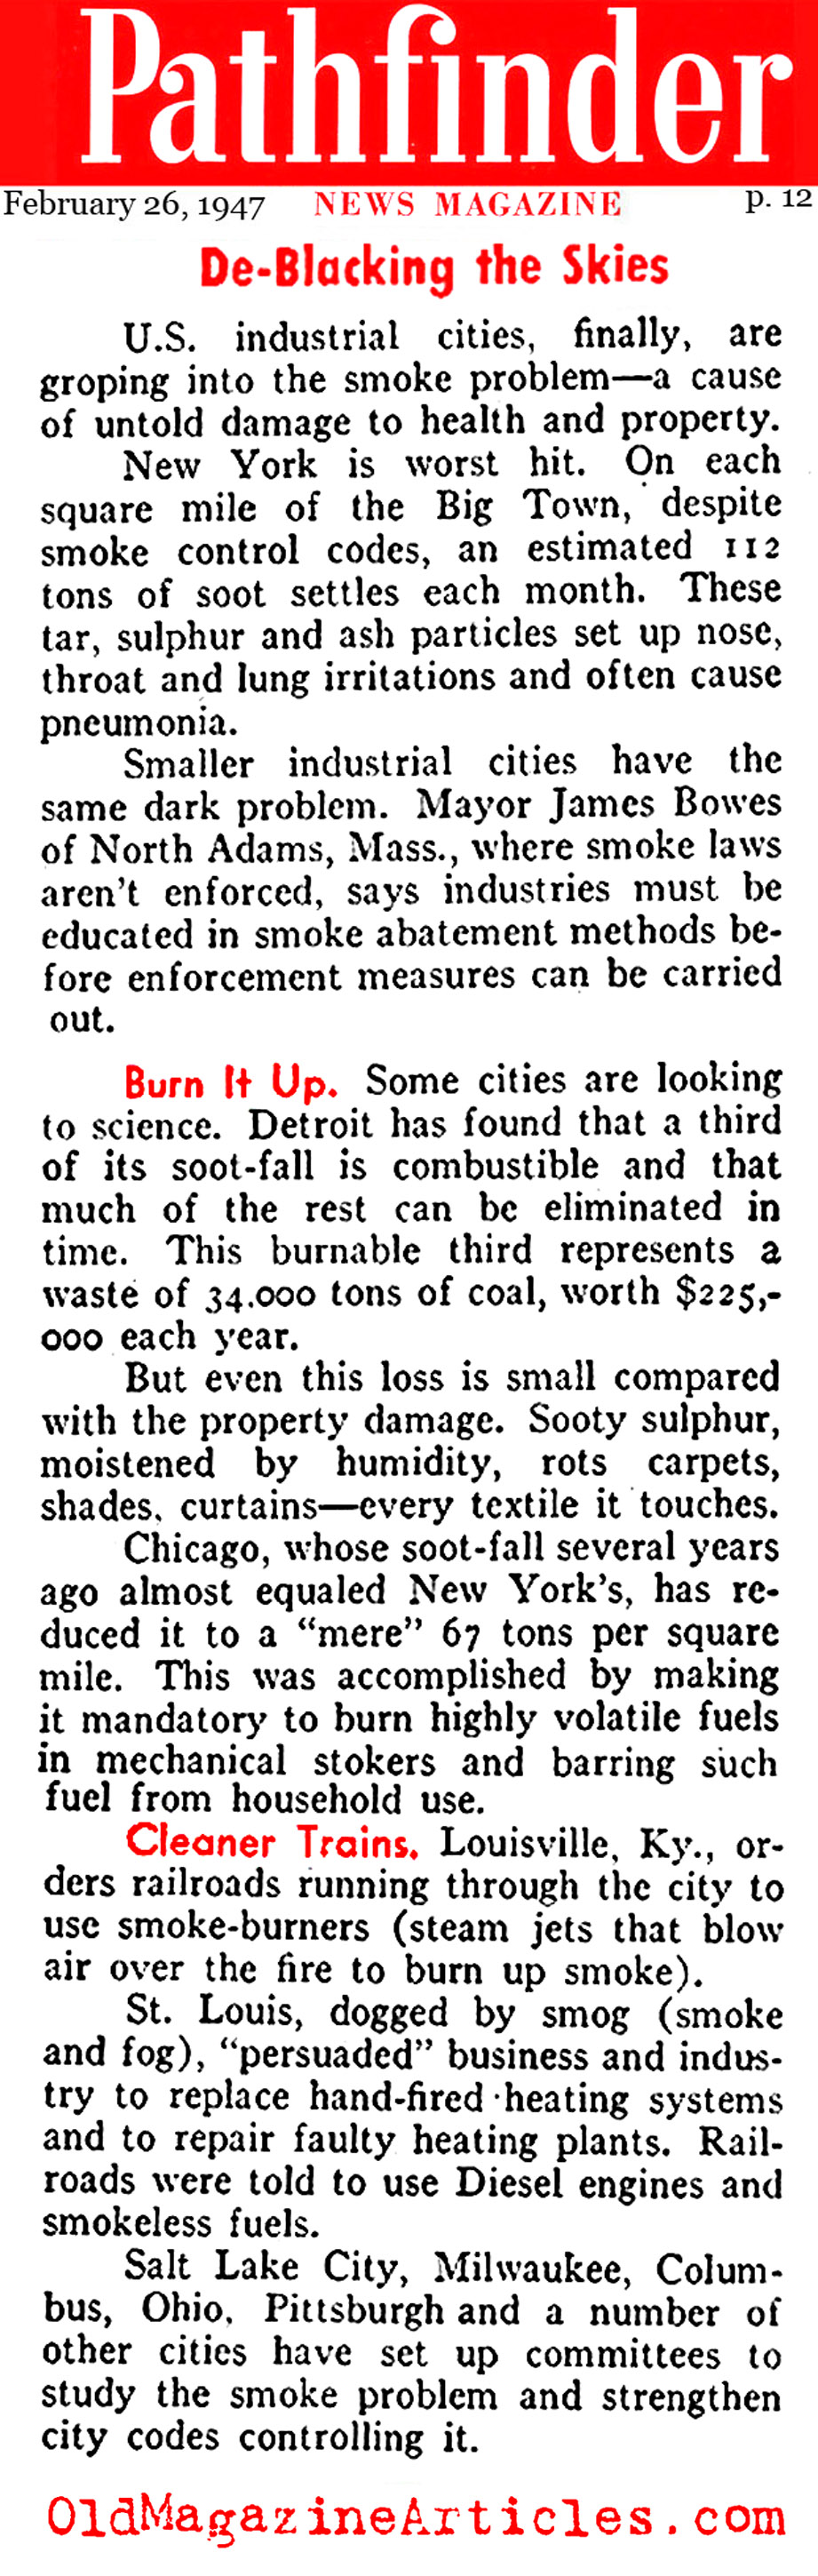 Air Pollution Becomes a Problem (Pathfinder Magazine, 1947)